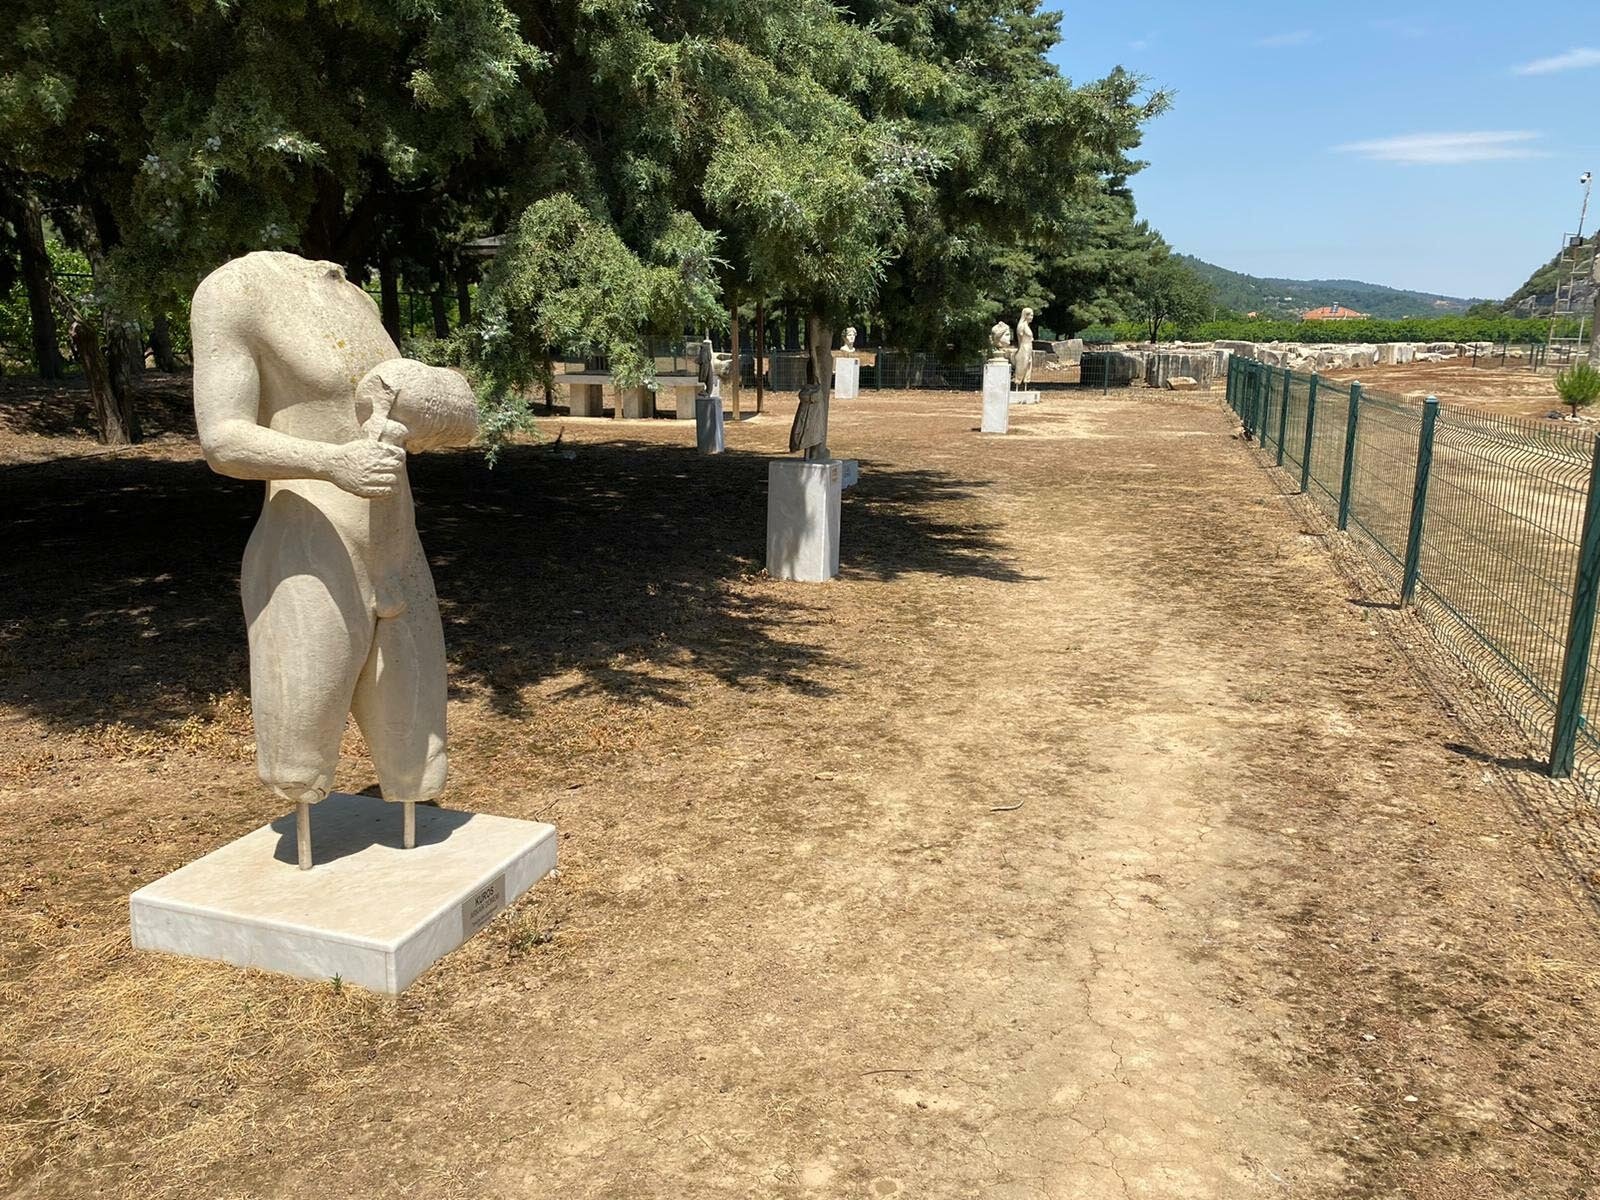 Replicas of the statues unearthed in Claros in the arkeopark of the site, Izmir, western Turkey, June 15, 2021. (DHA Photo)